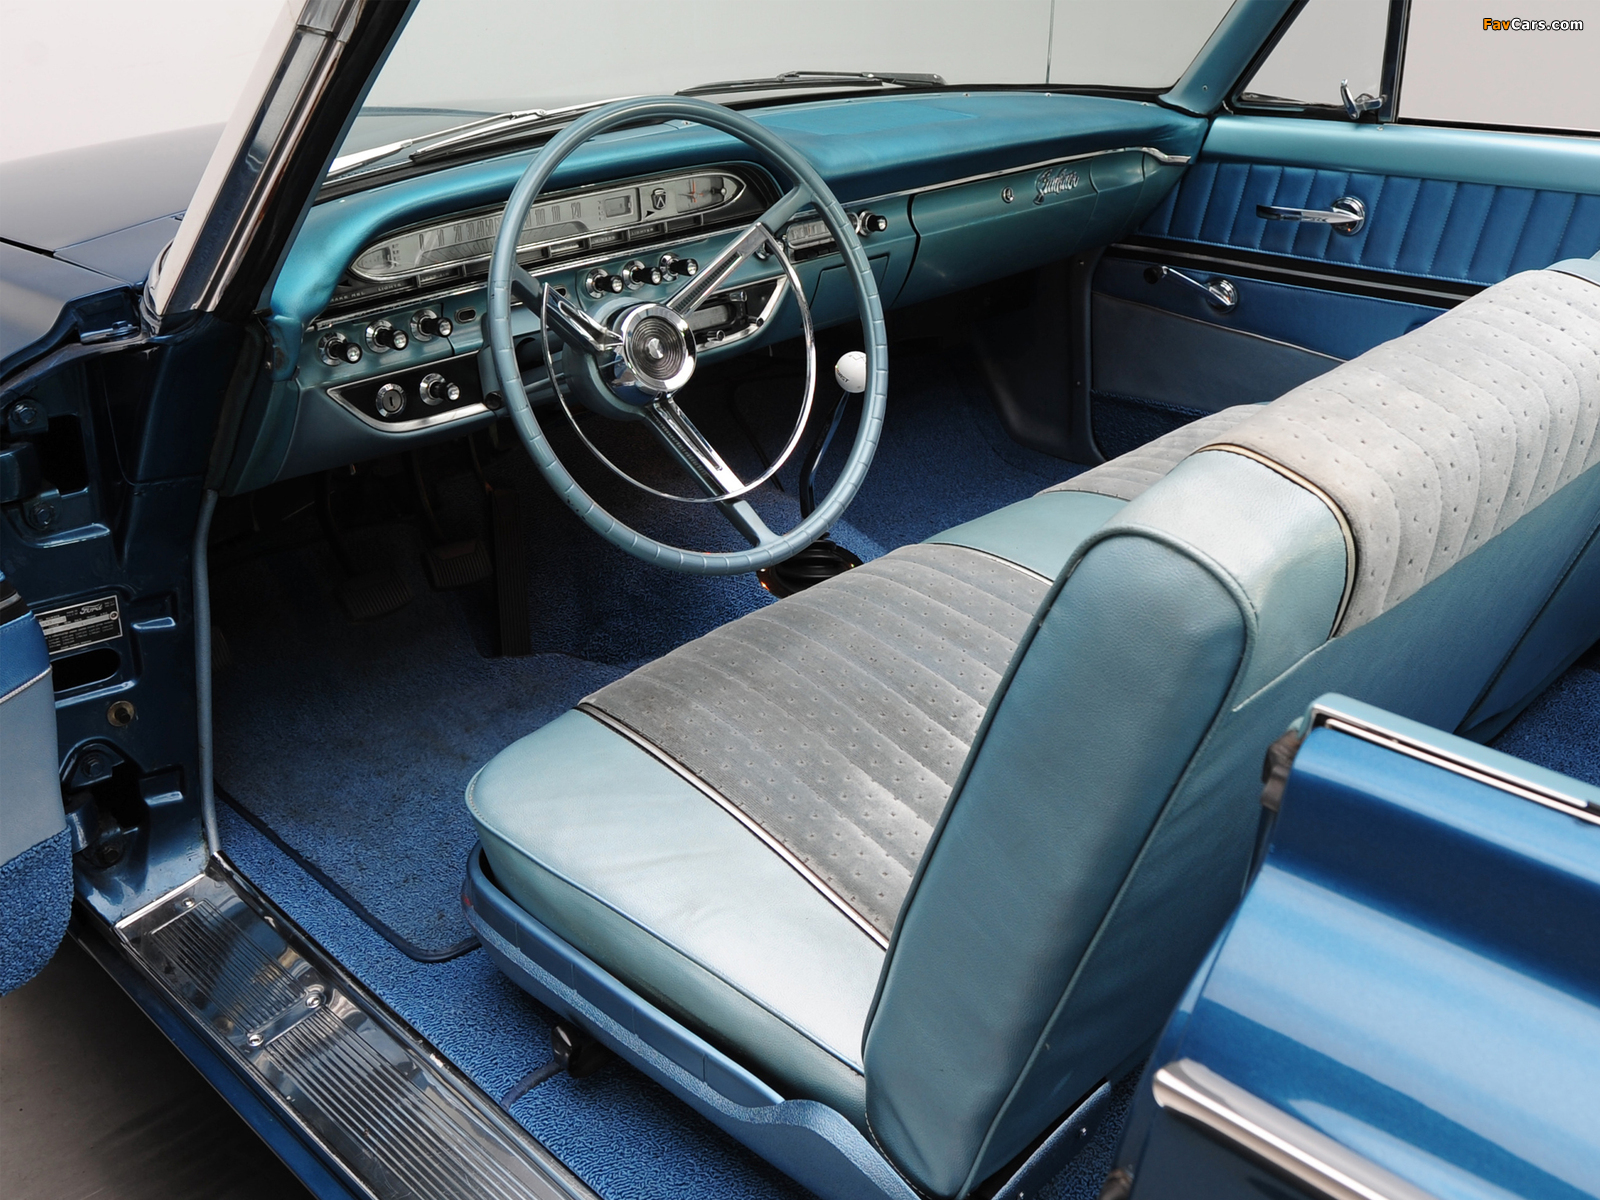 Ford Galaxie Sunliner 390 1961 images (1600 x 1200)